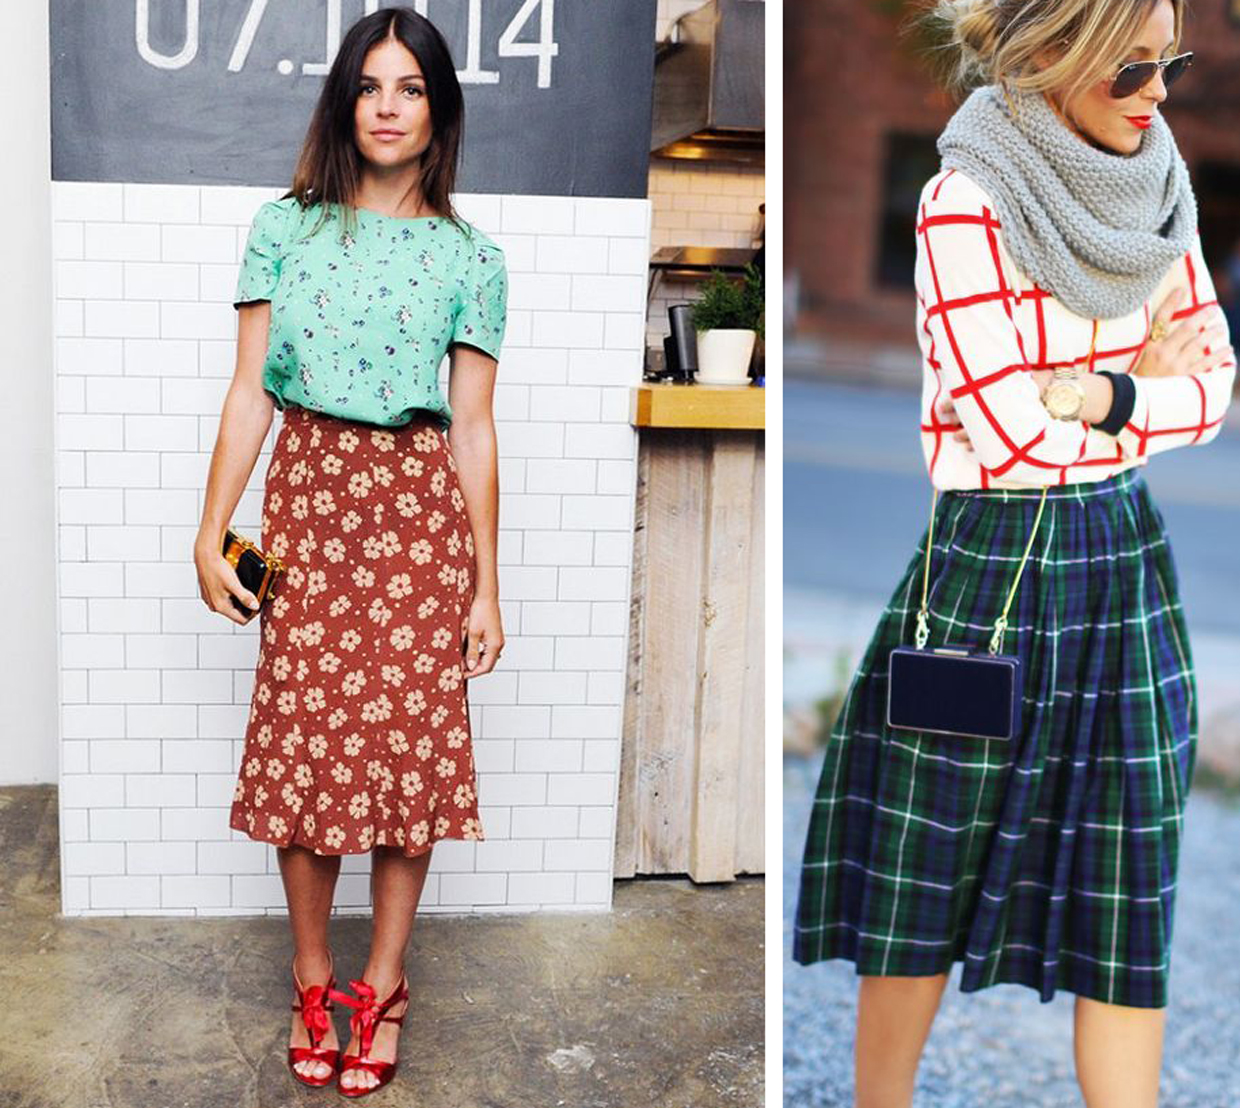 How to Mix and Match Prints